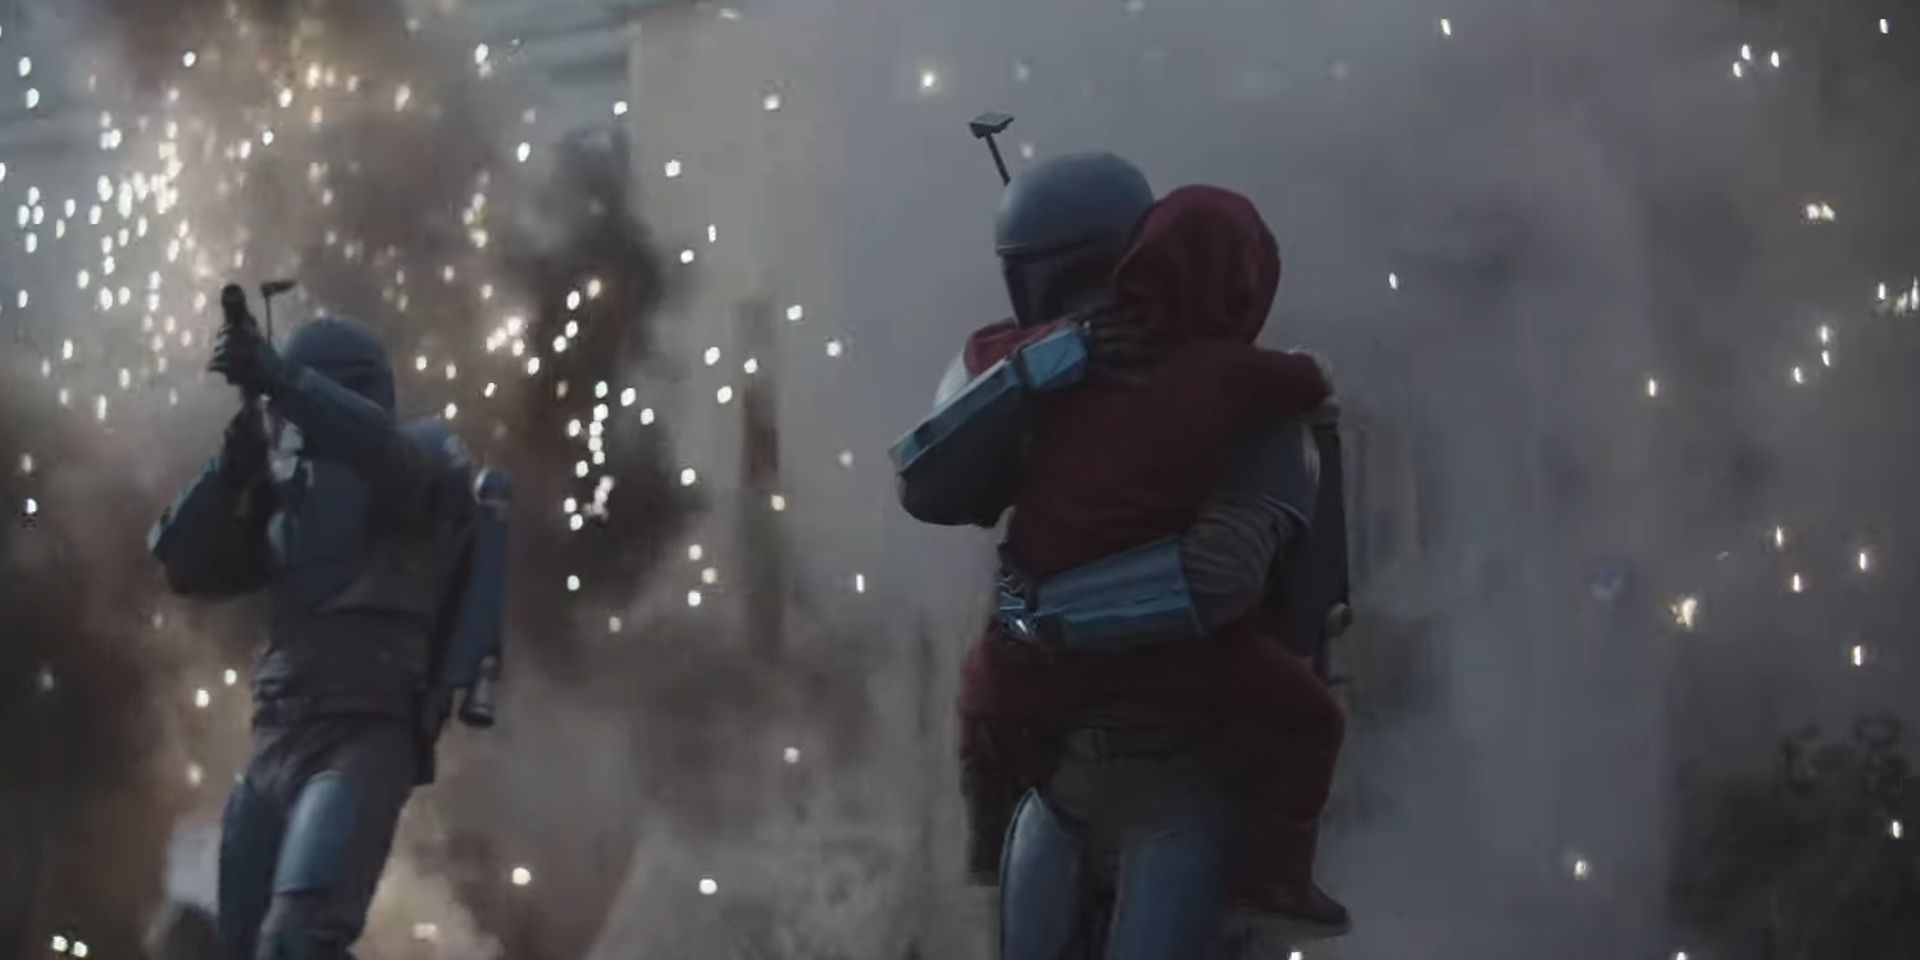 A young Din Djarin being held by the Mandalorian who saved him as they prepare to fly away from the Aq Vetina battle